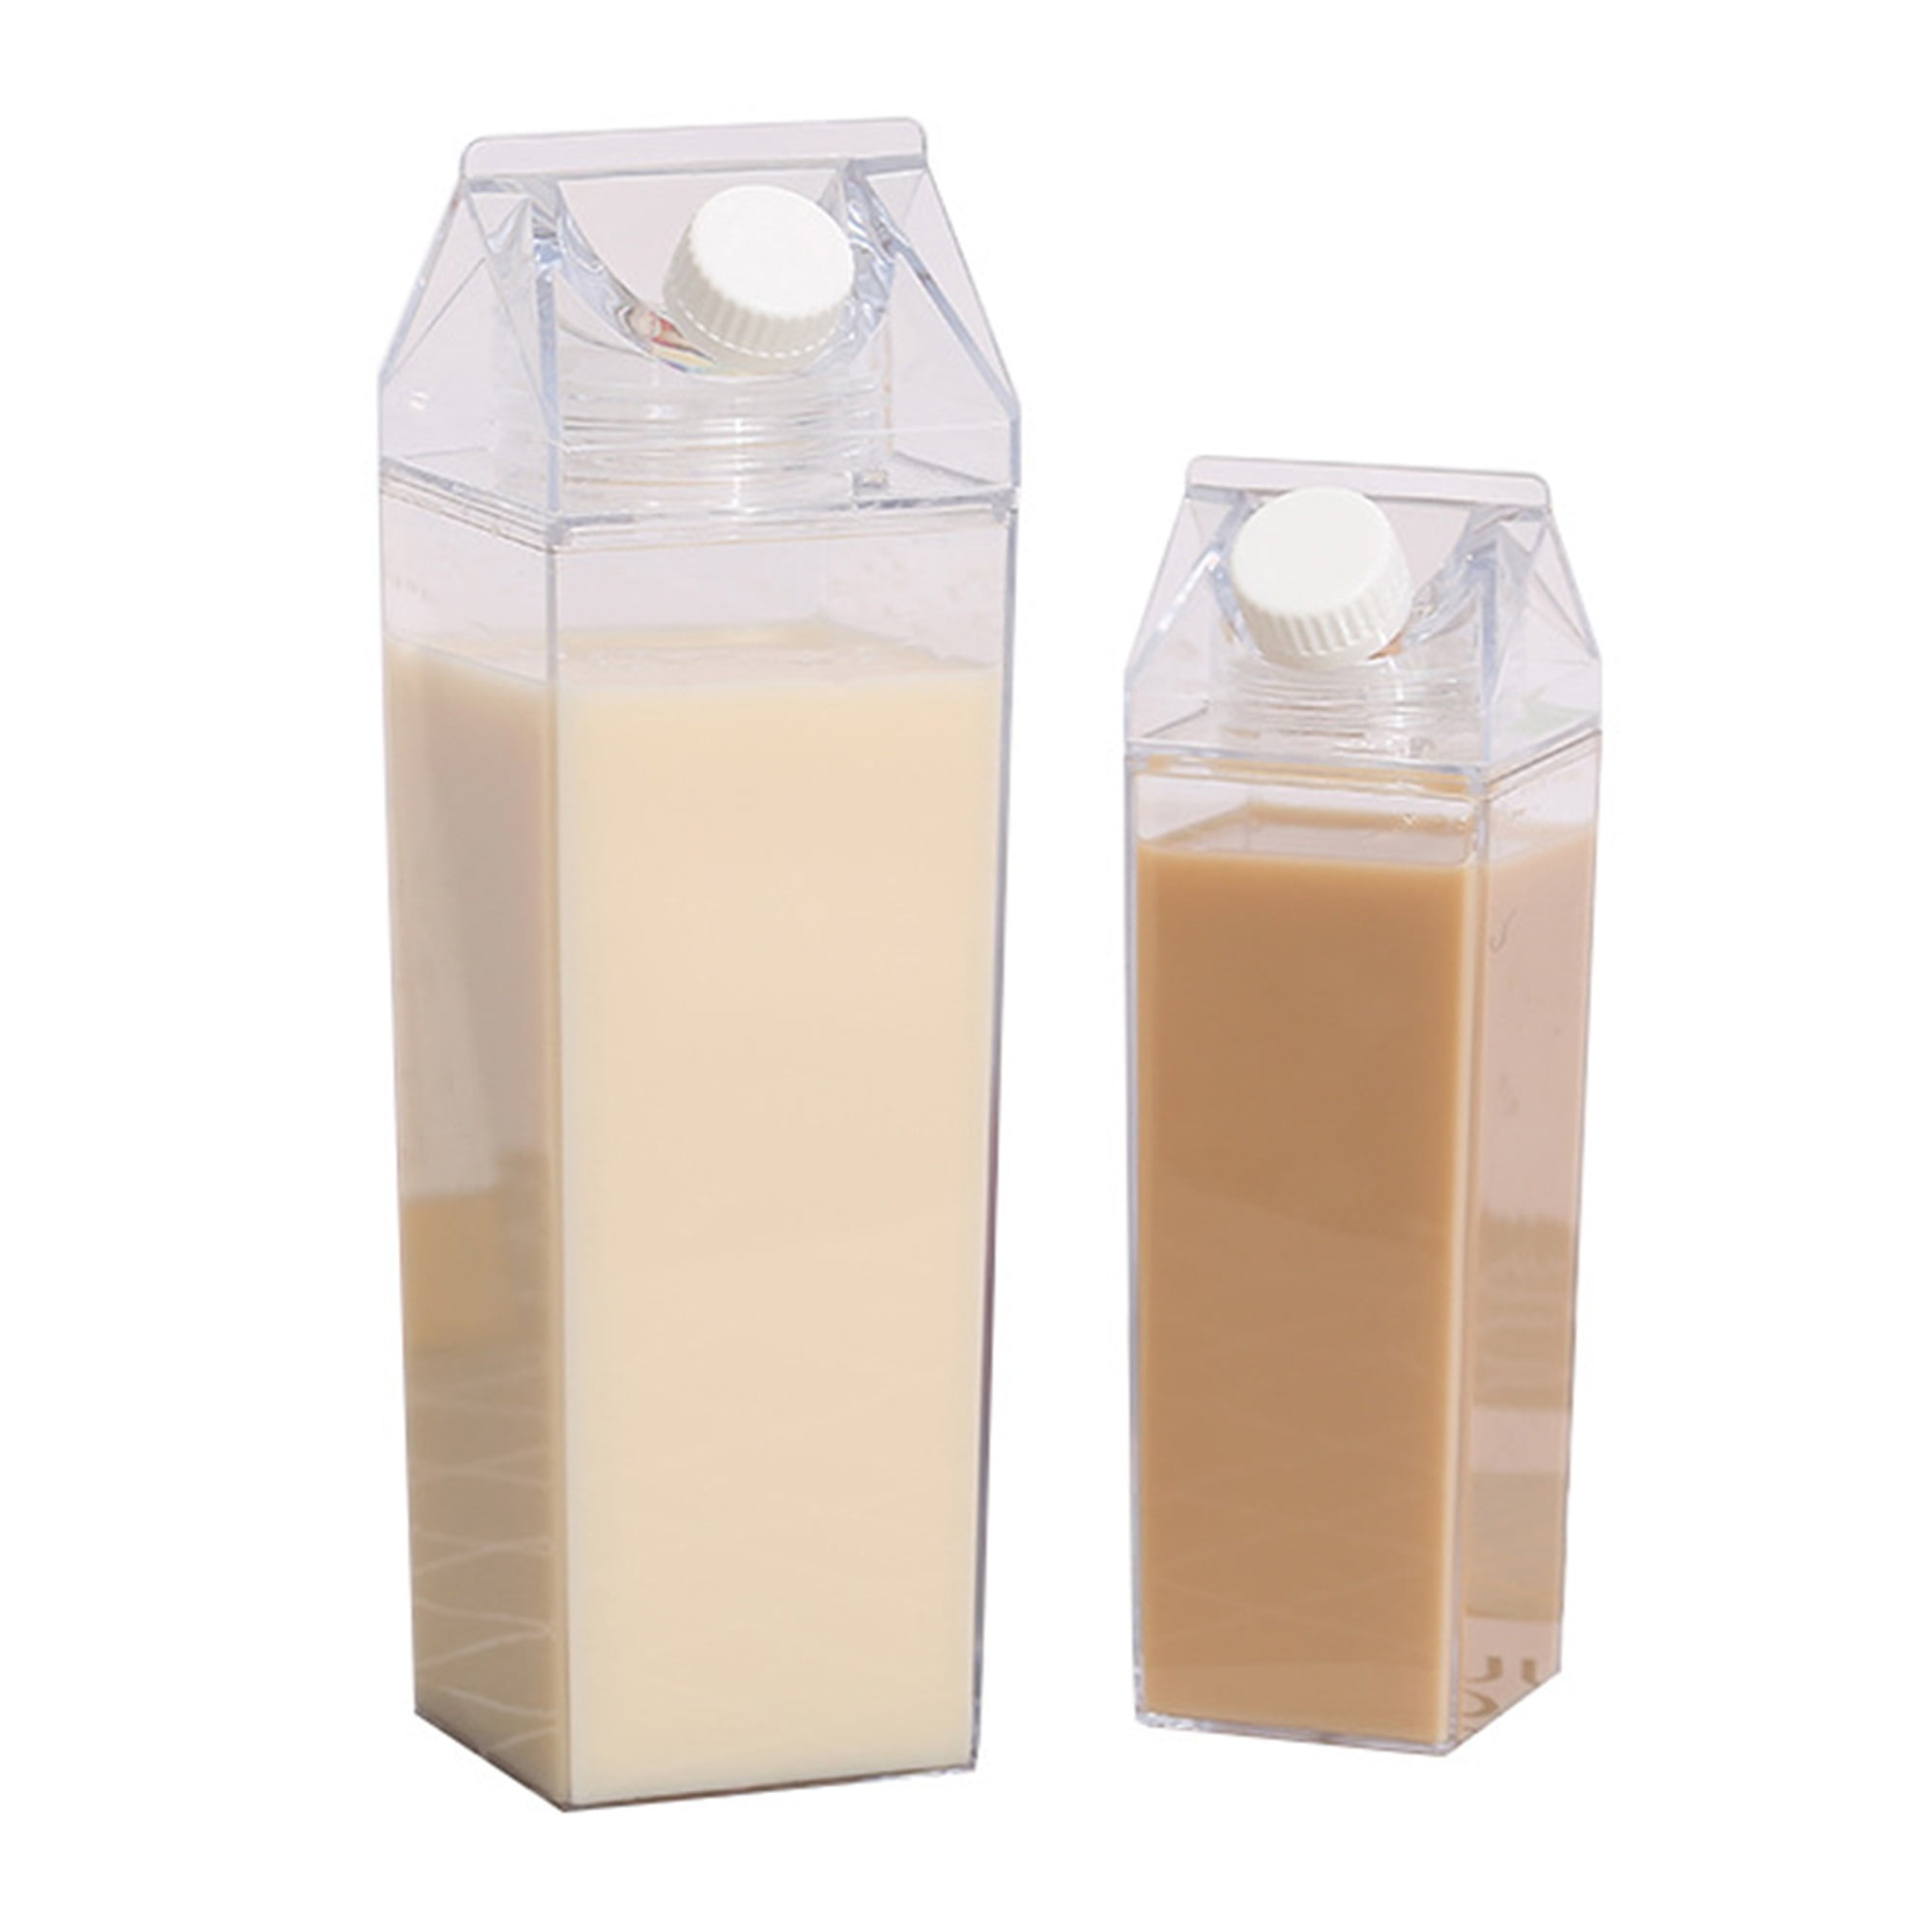 Premium AI Image  Blank small milk box with lid on white background  Plastic packaging for juice